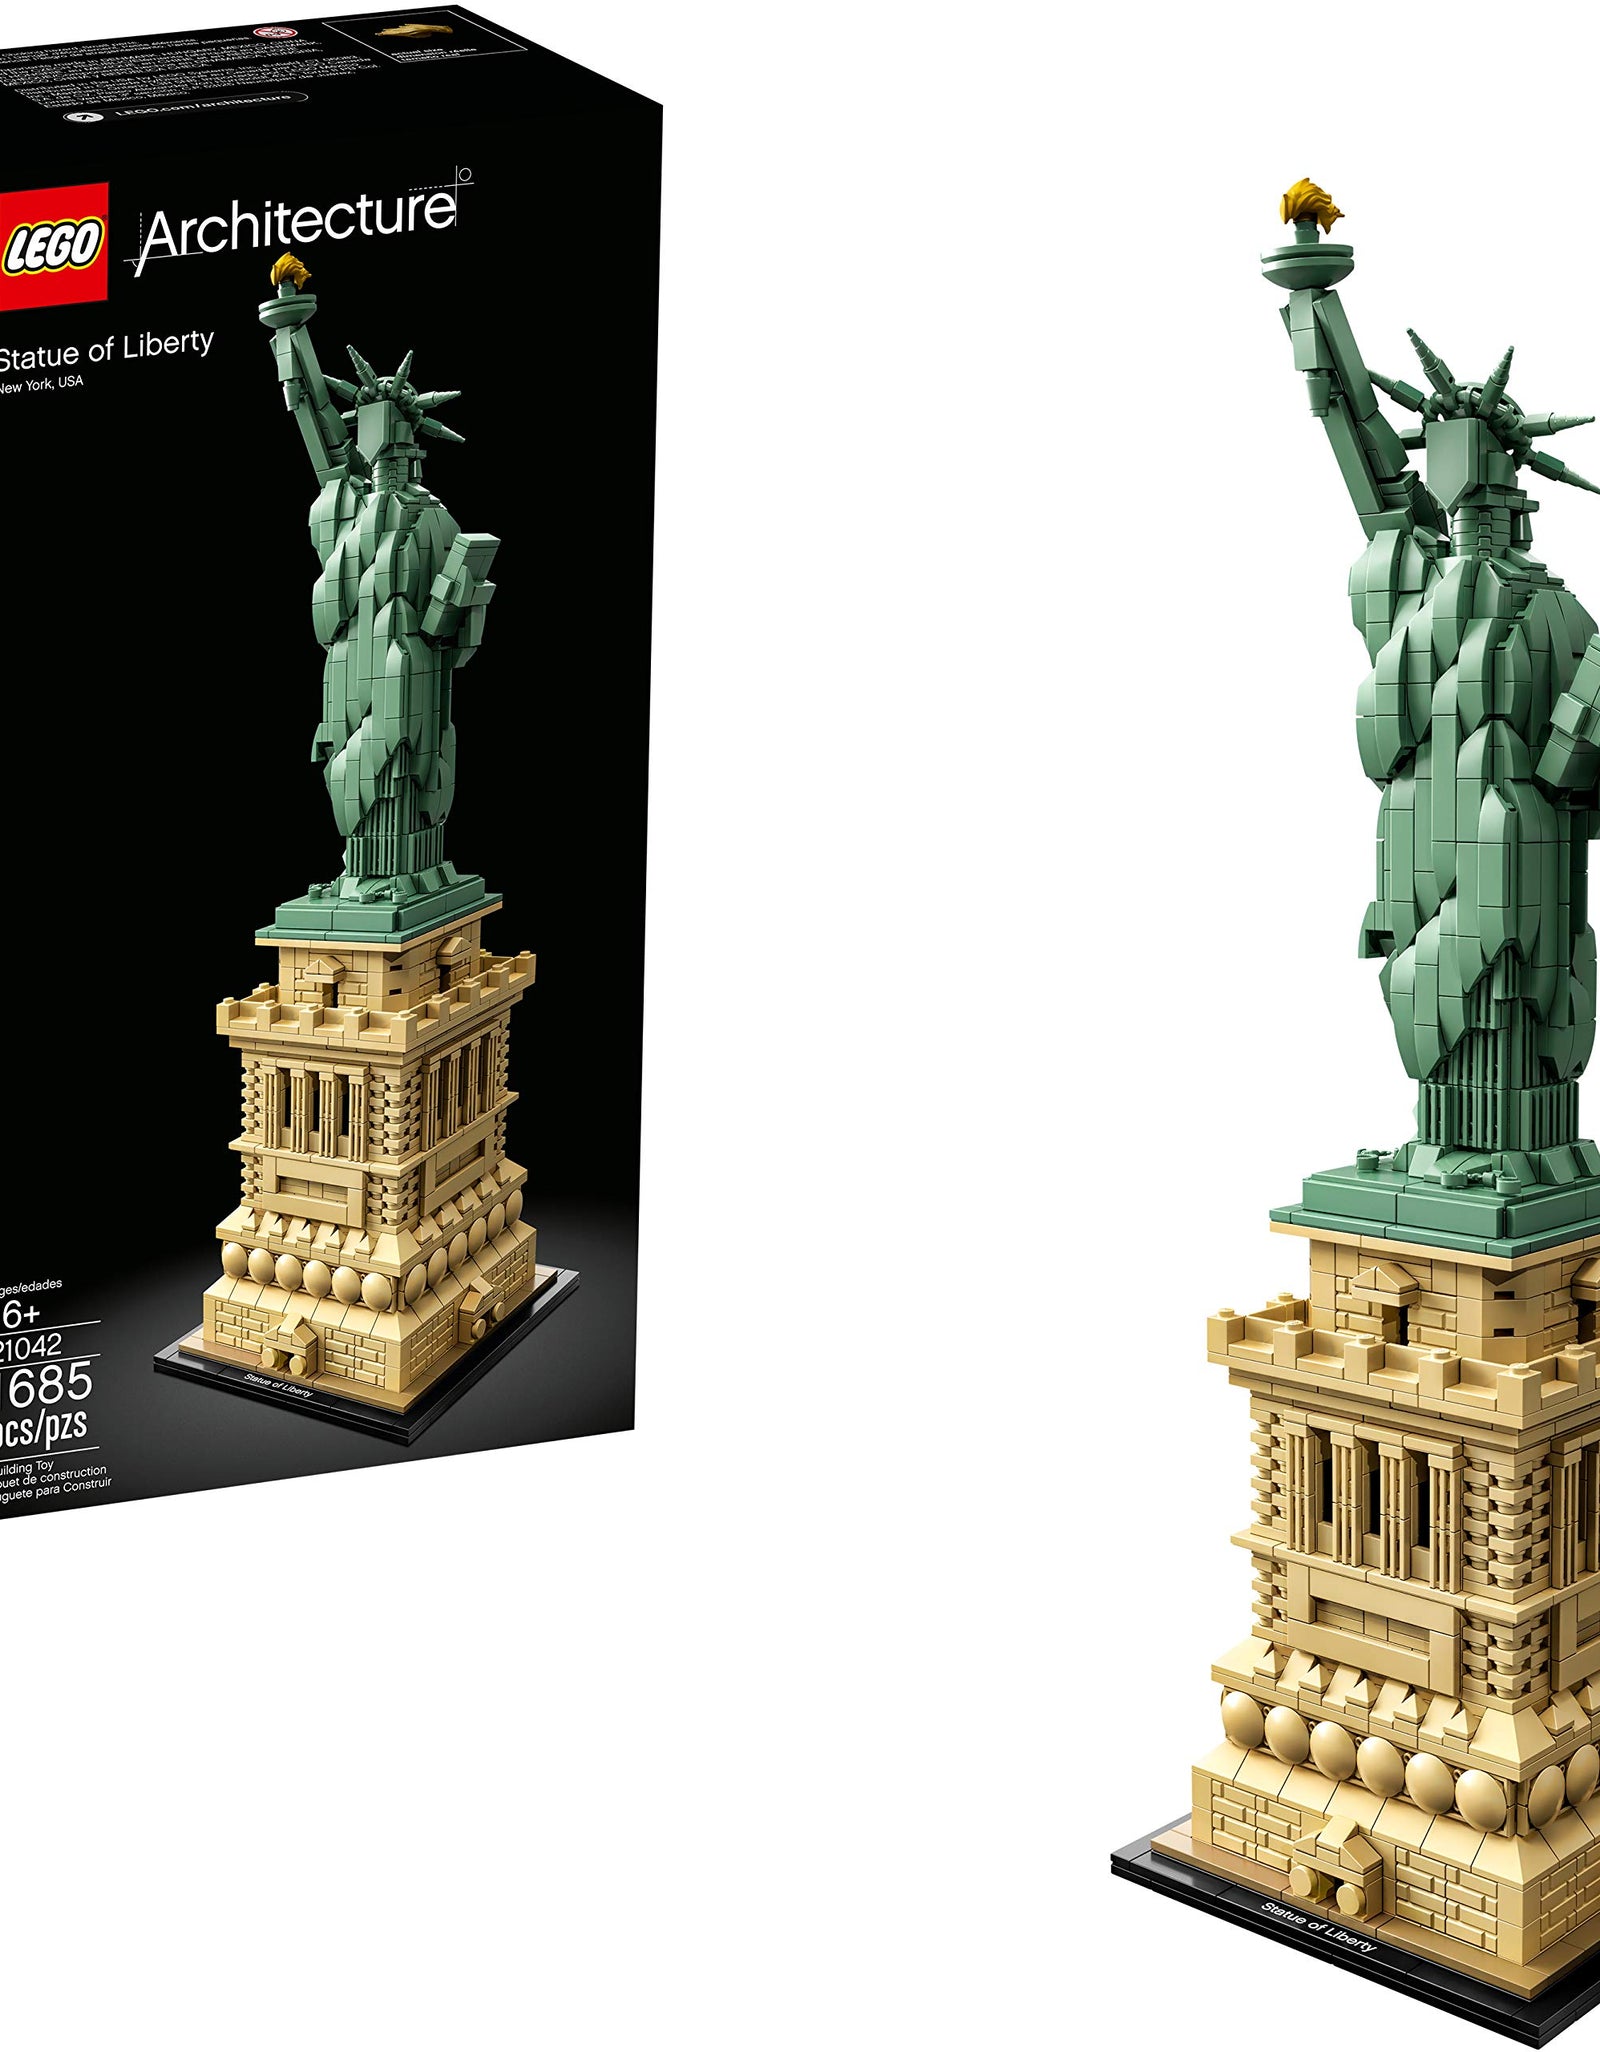 LEGO Architecture Statue of Liberty 21042 Building Kit (1685 Pieces)